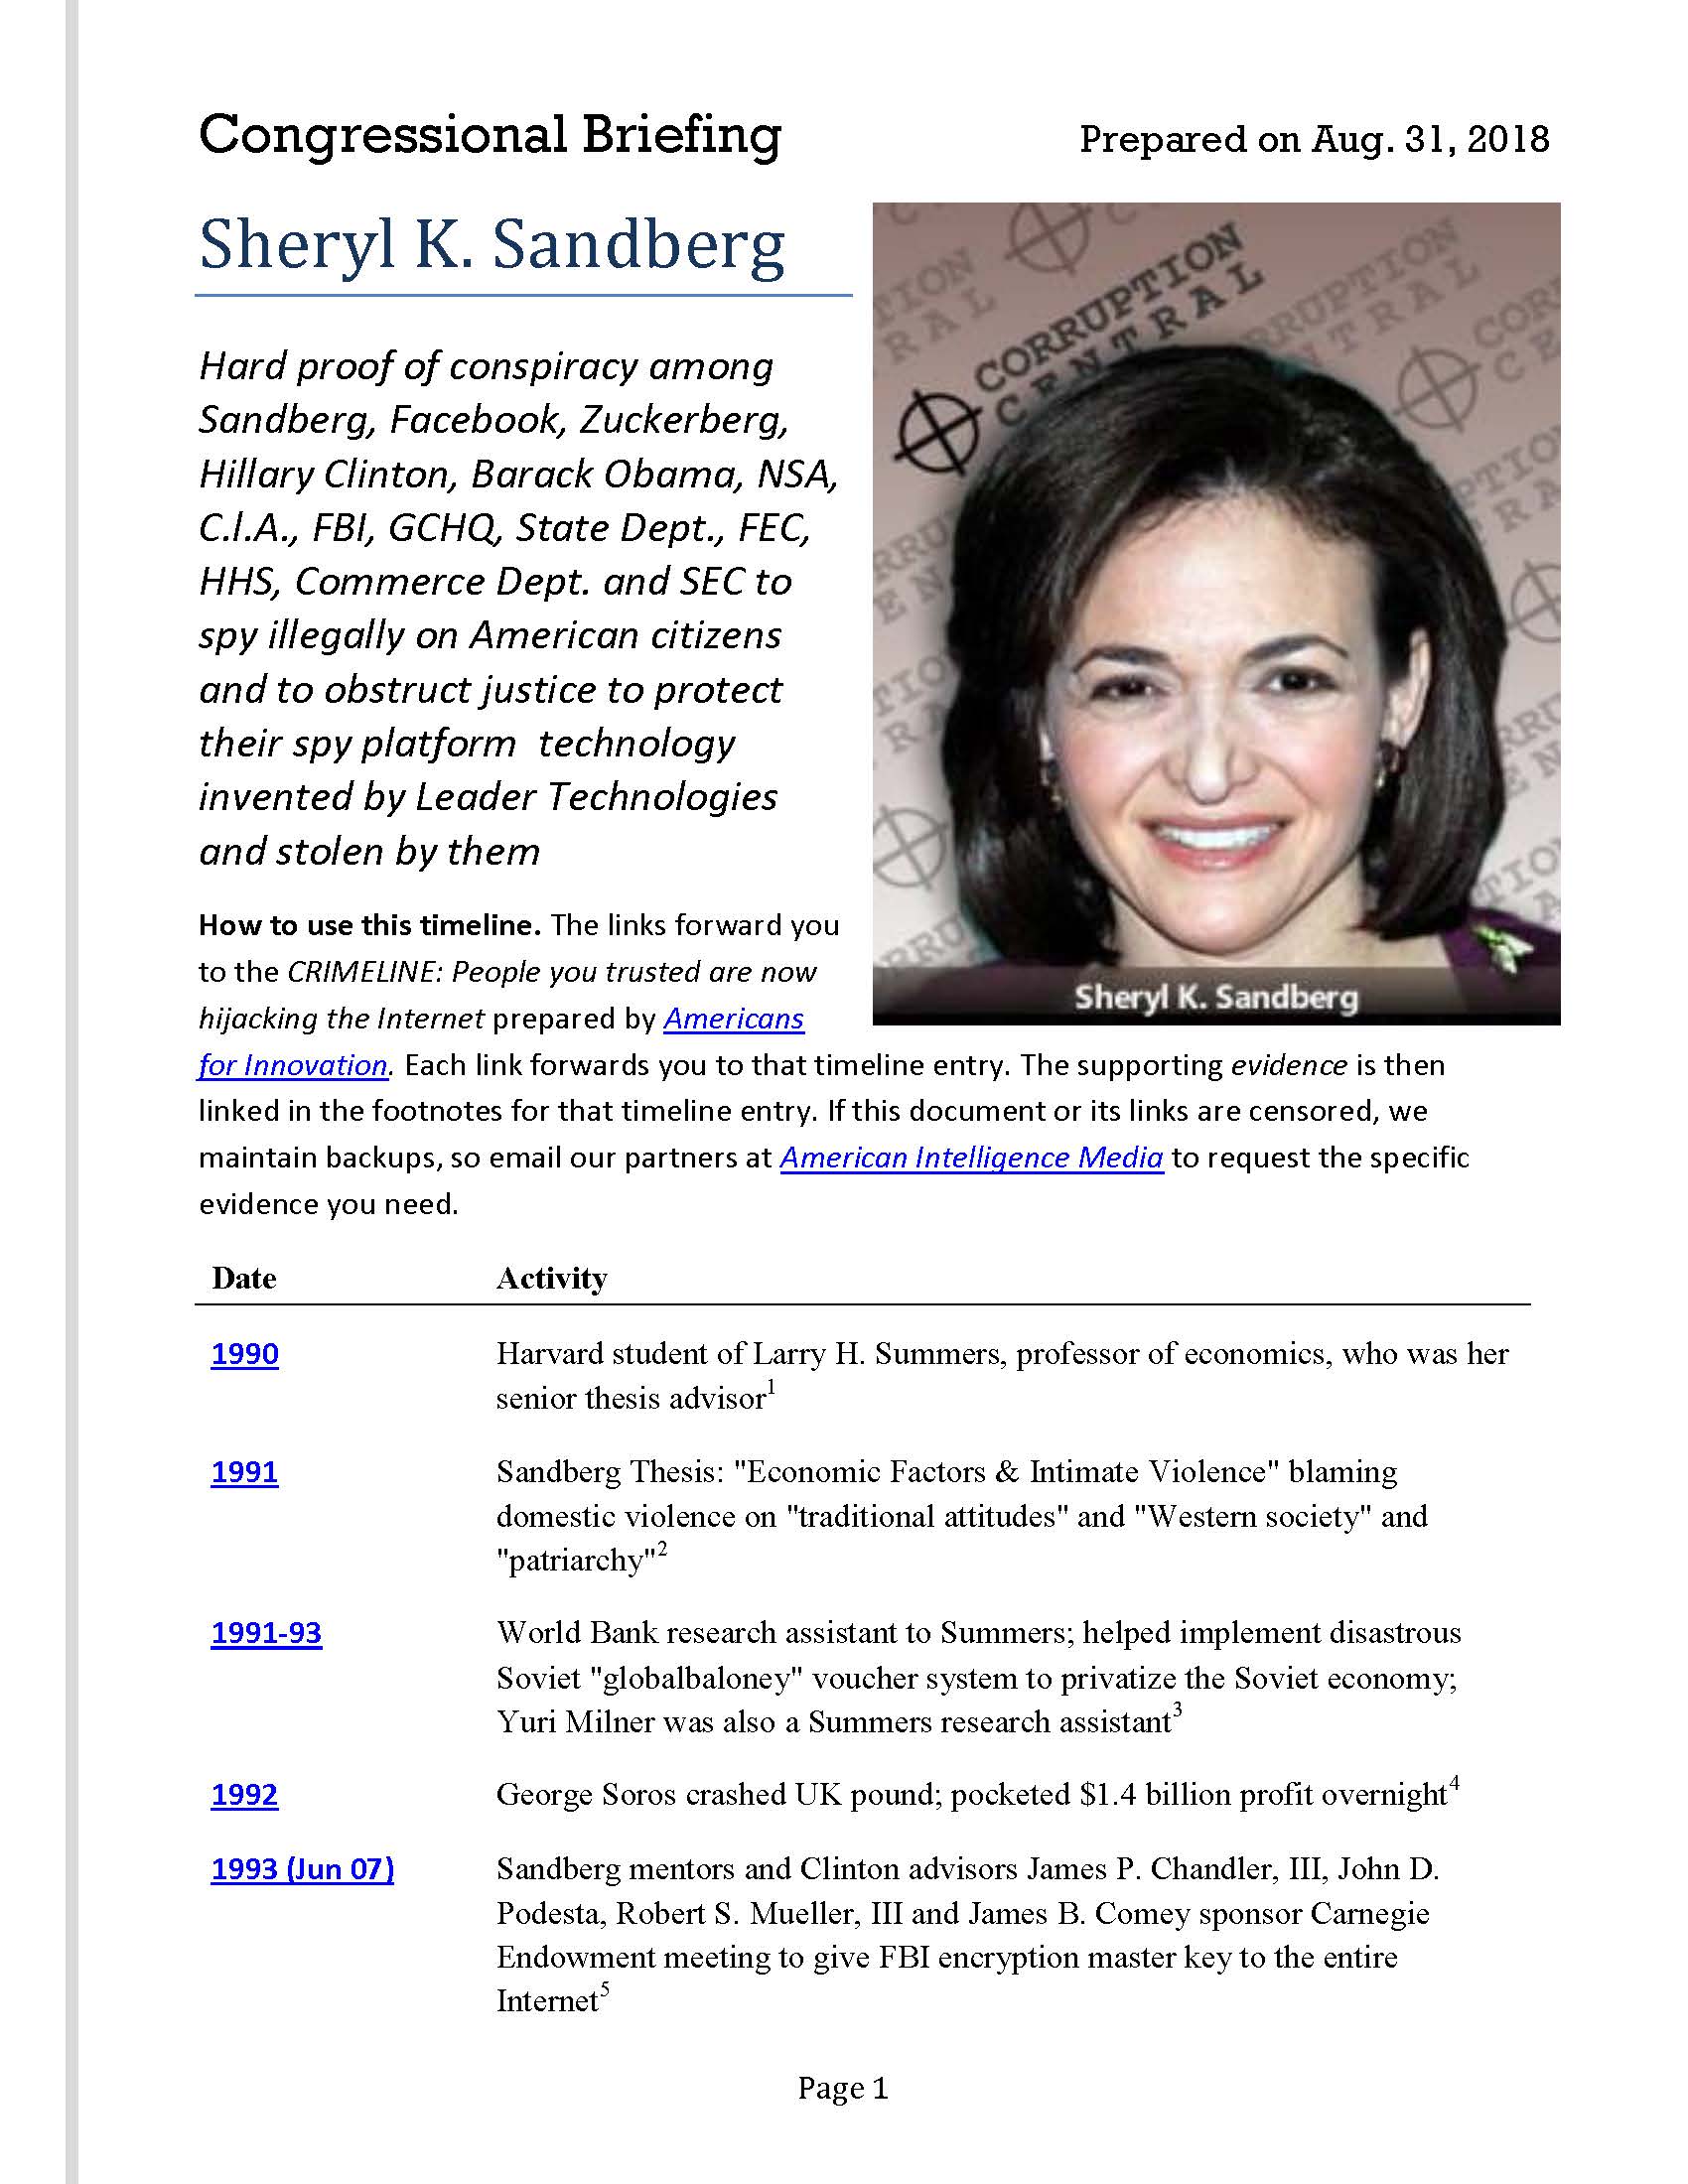 Congressional Briefing. (Aug. 31, 2018). Sheryl K. Sandberg's conspiracy to create a police state in America. Americans for Innovation, American Intelligence Media.